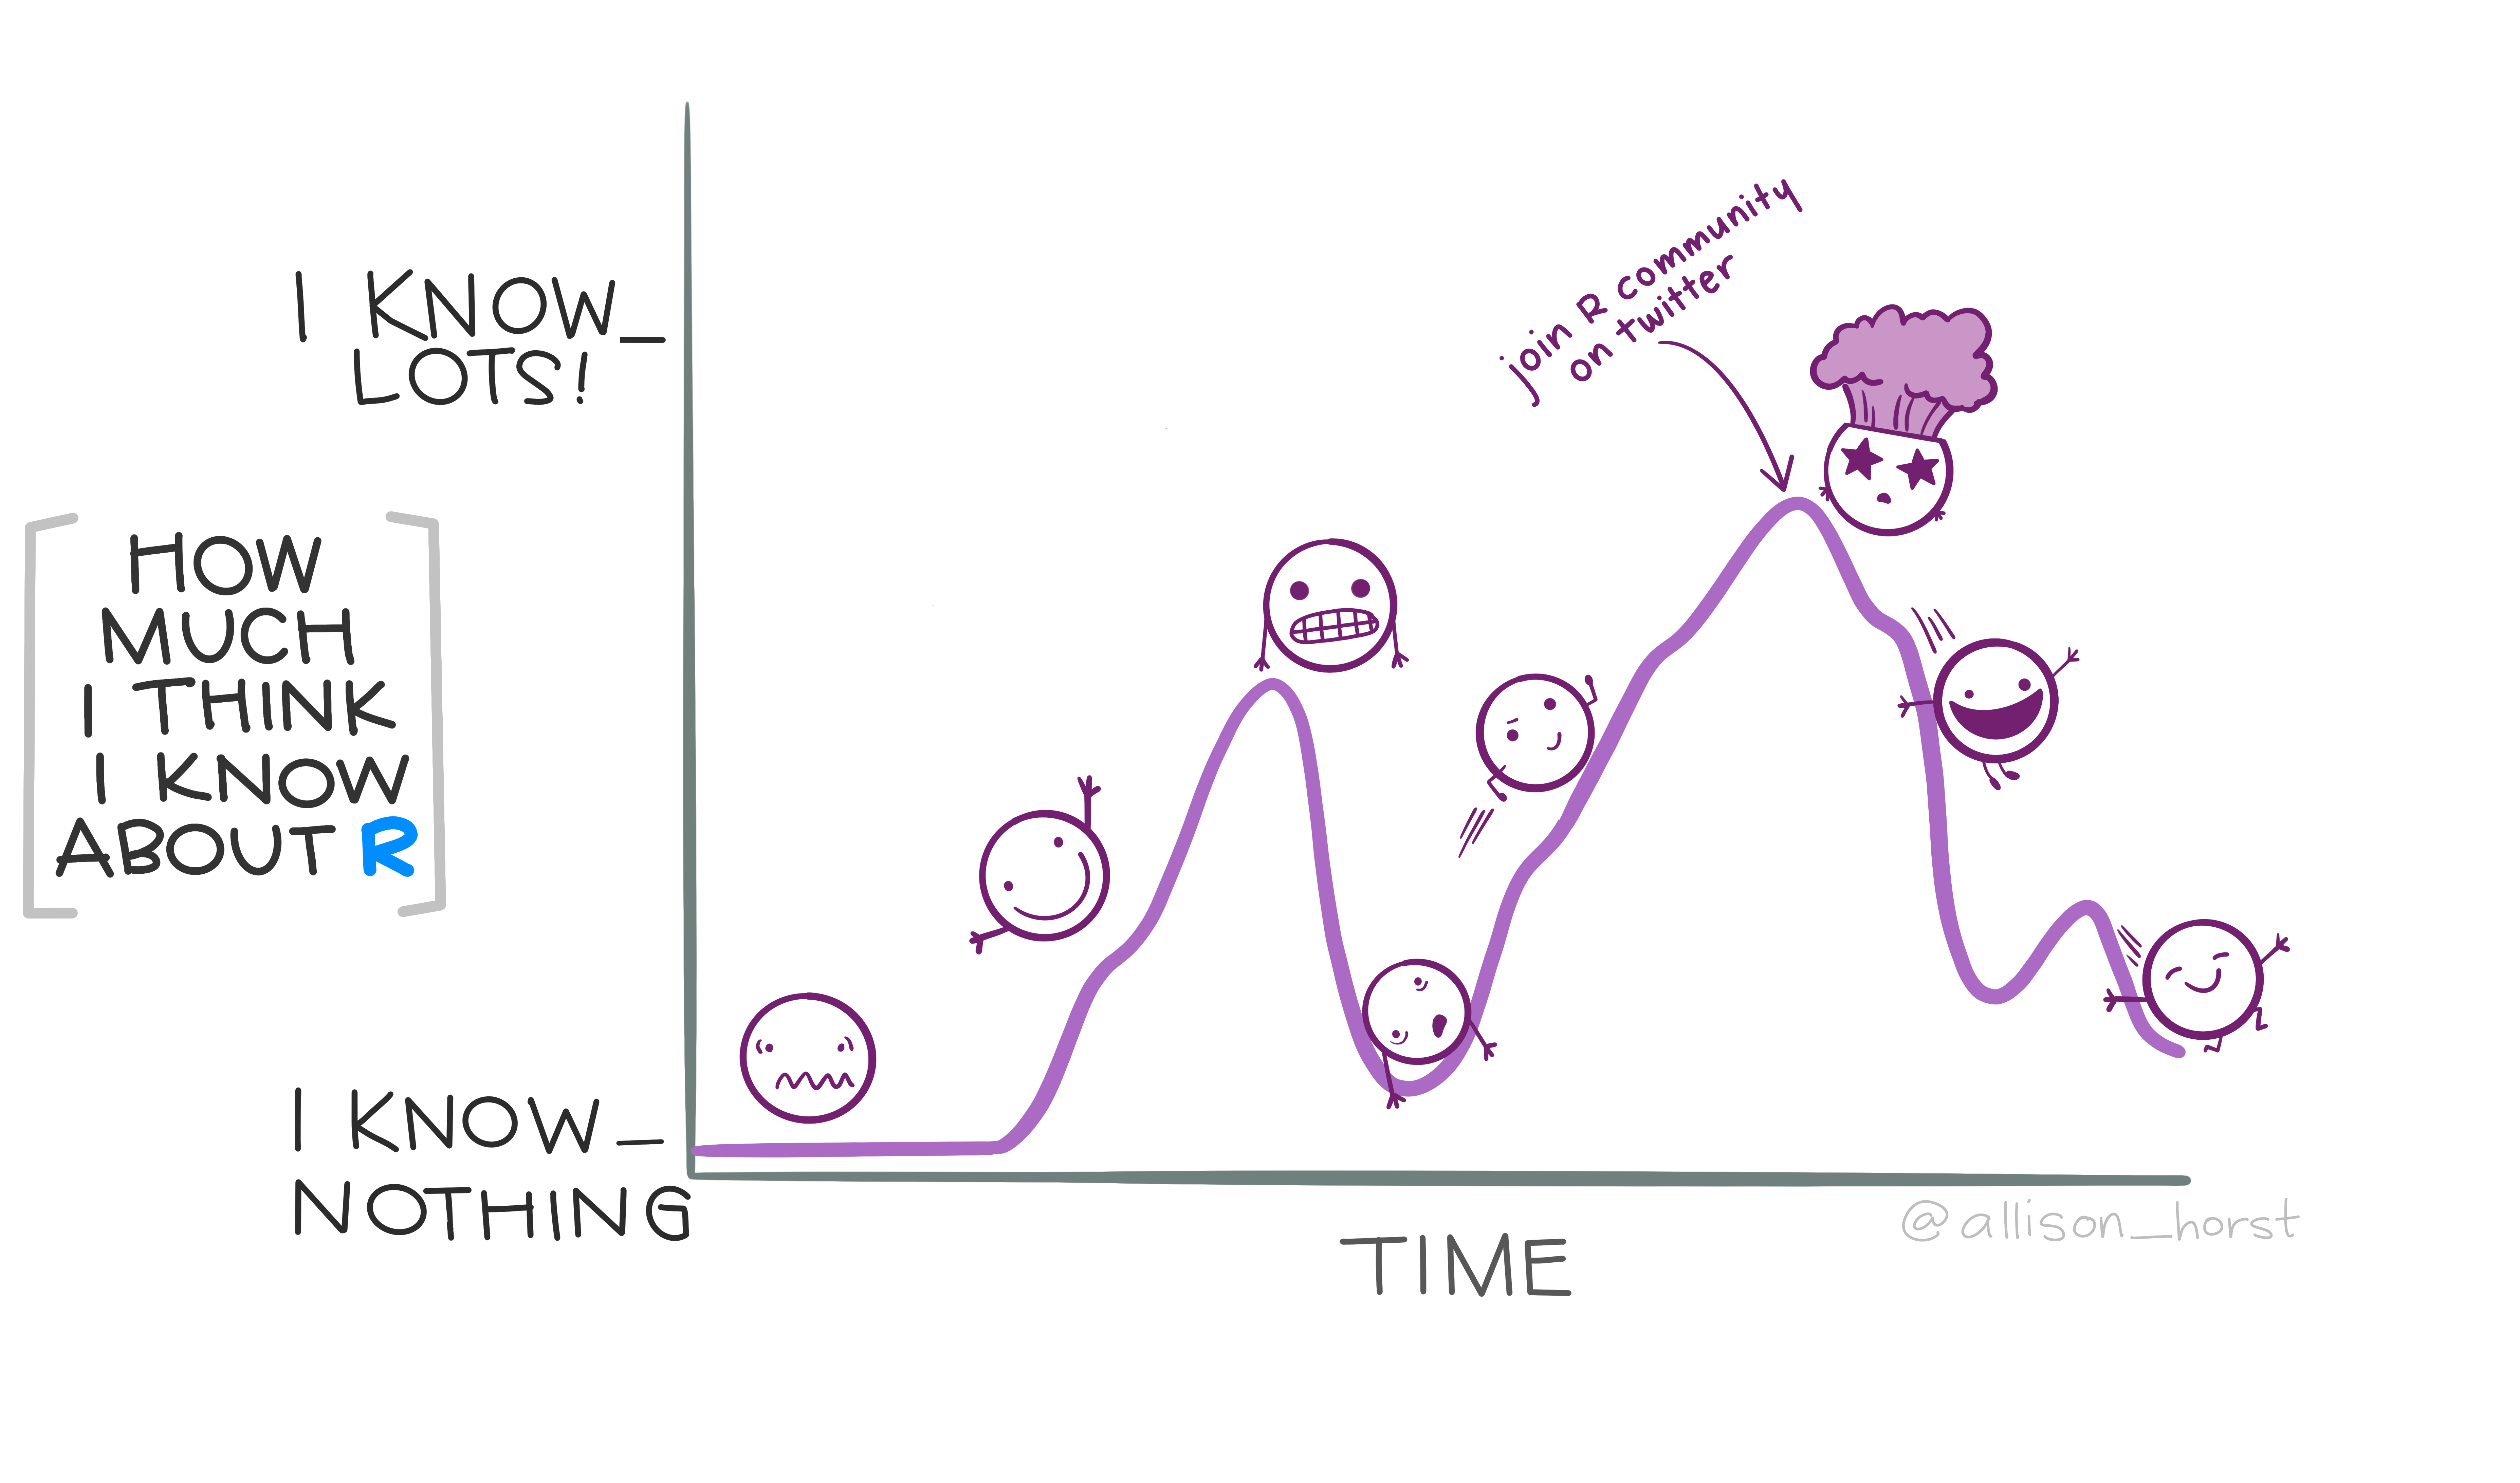 An illustrated cartoon graph with “How much I think I know about R” on the y-axis, with axis labels at “I know nothing” and “I know lots”, versus “time” on the x-axis. The line varies widely between the two. Above the line are emoji-like faces, showing uncertainty and hope early on. At a second peak is the label “join R community on twitter”, with a “mind-blown” emoji face. The line quickly descends, but with a happy looking emoji character sliding down it.